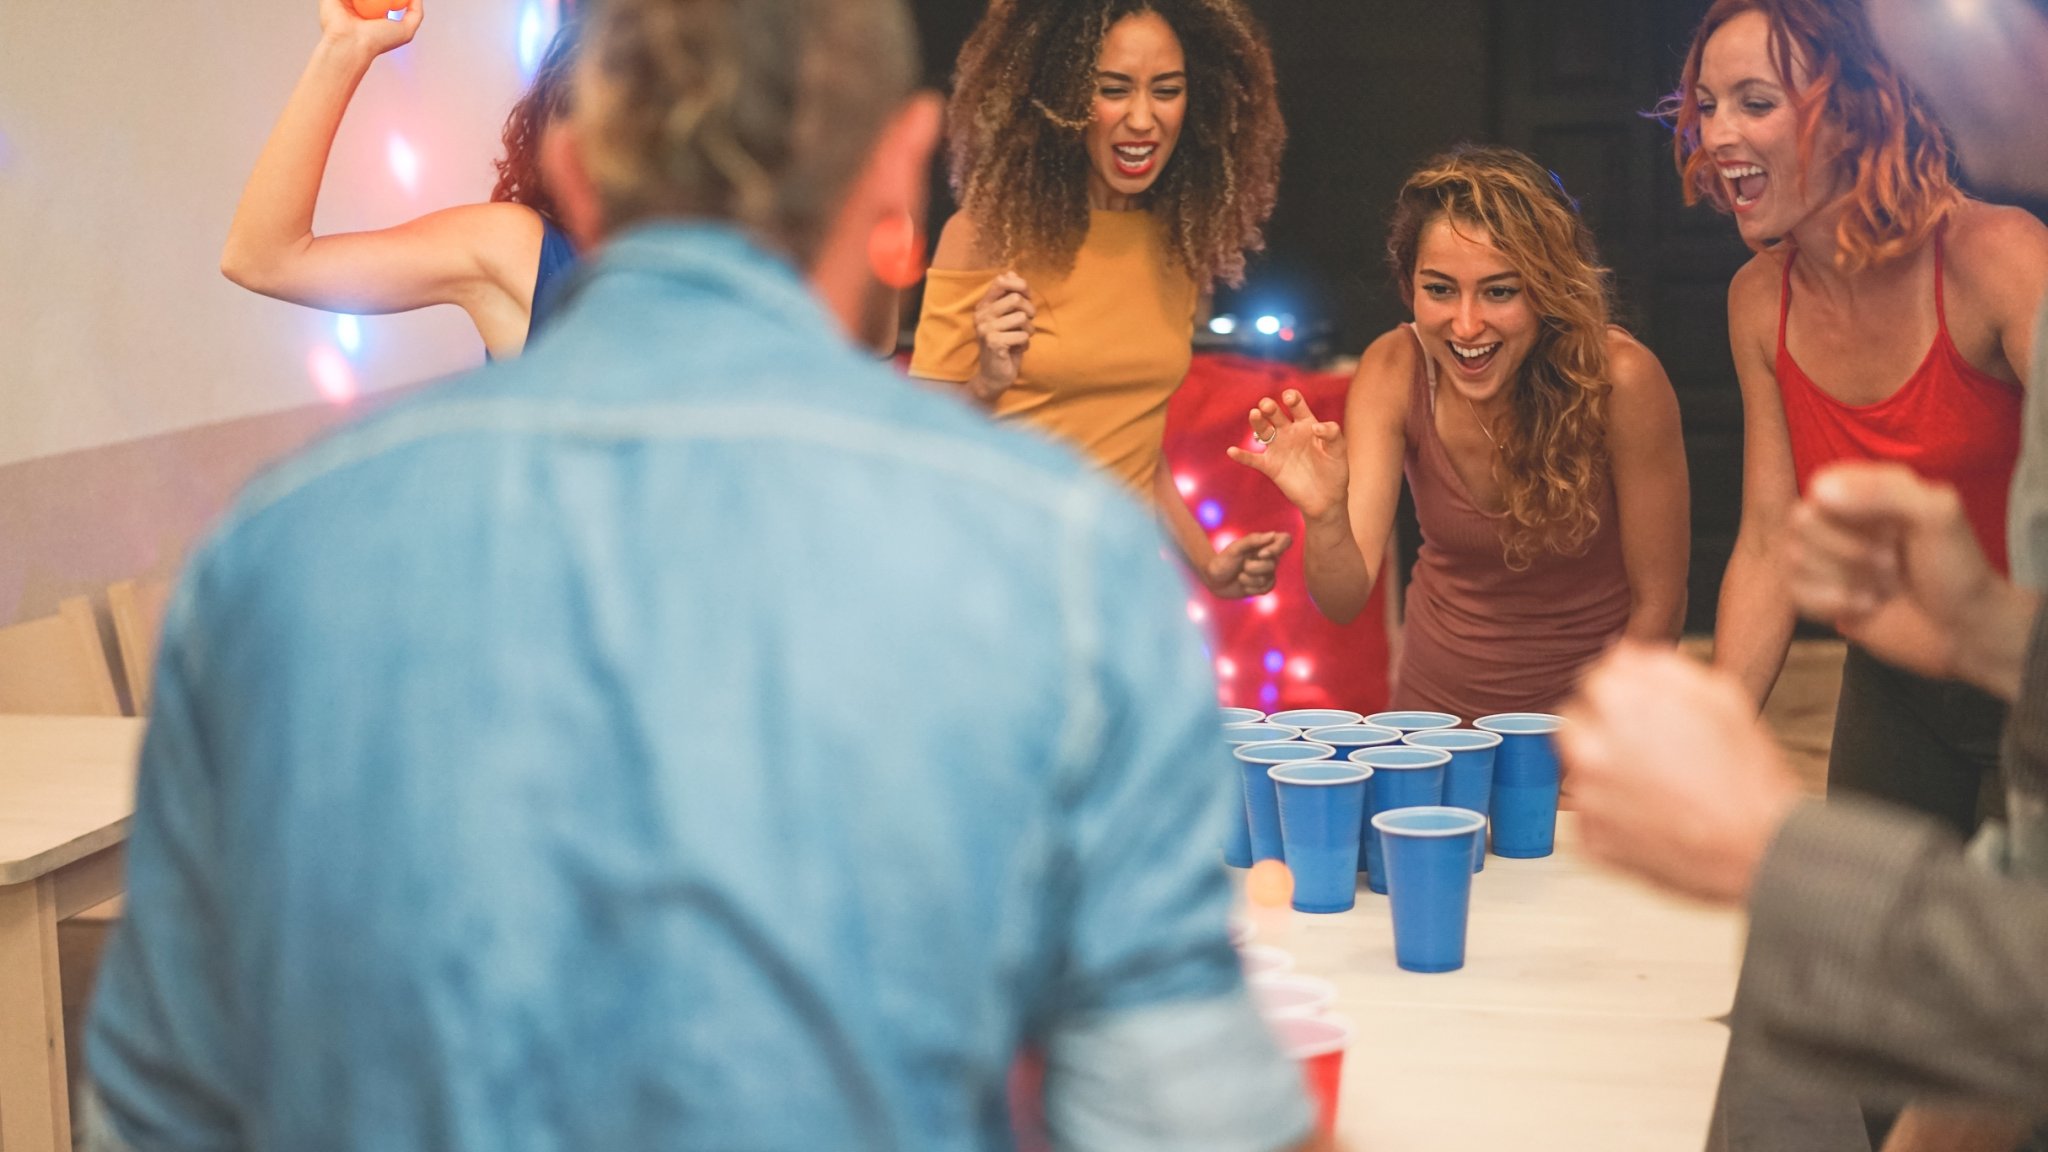 Women Are Now Boozing Harder Than Men For The First Time In American History